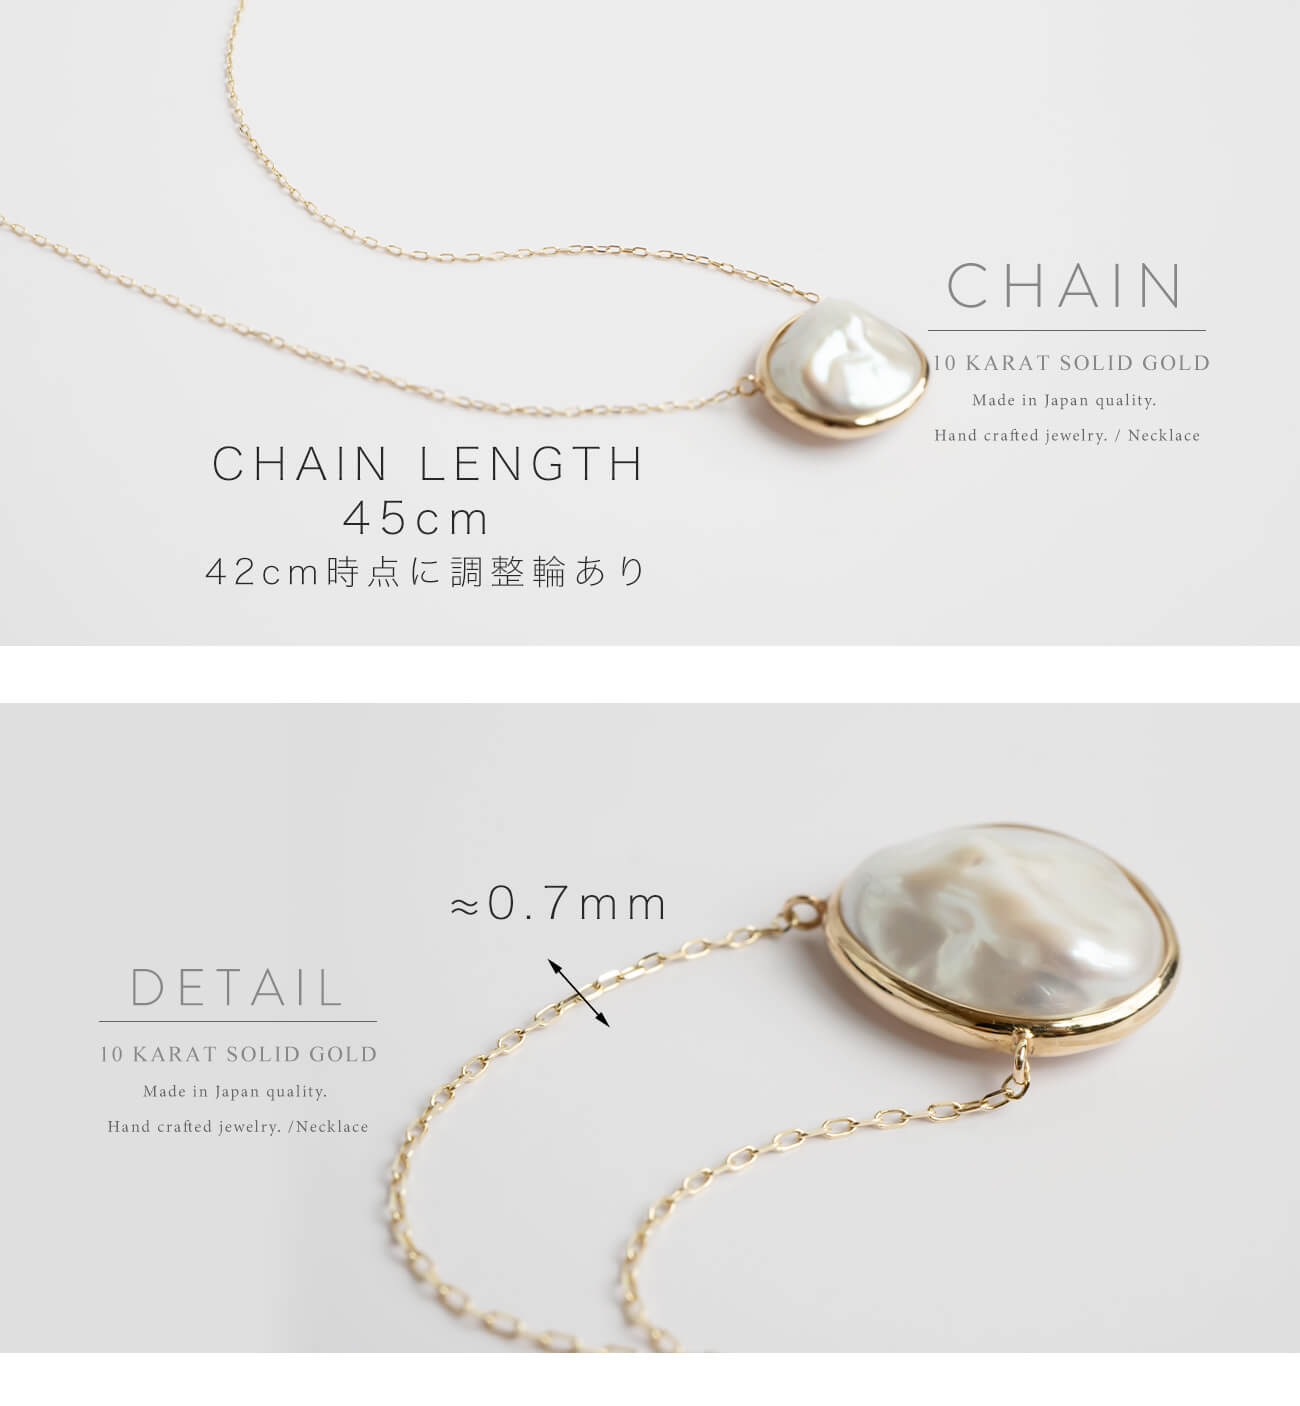 Coin Pearl Gold Necklace | PROPRIUM PERLA NECKLACE